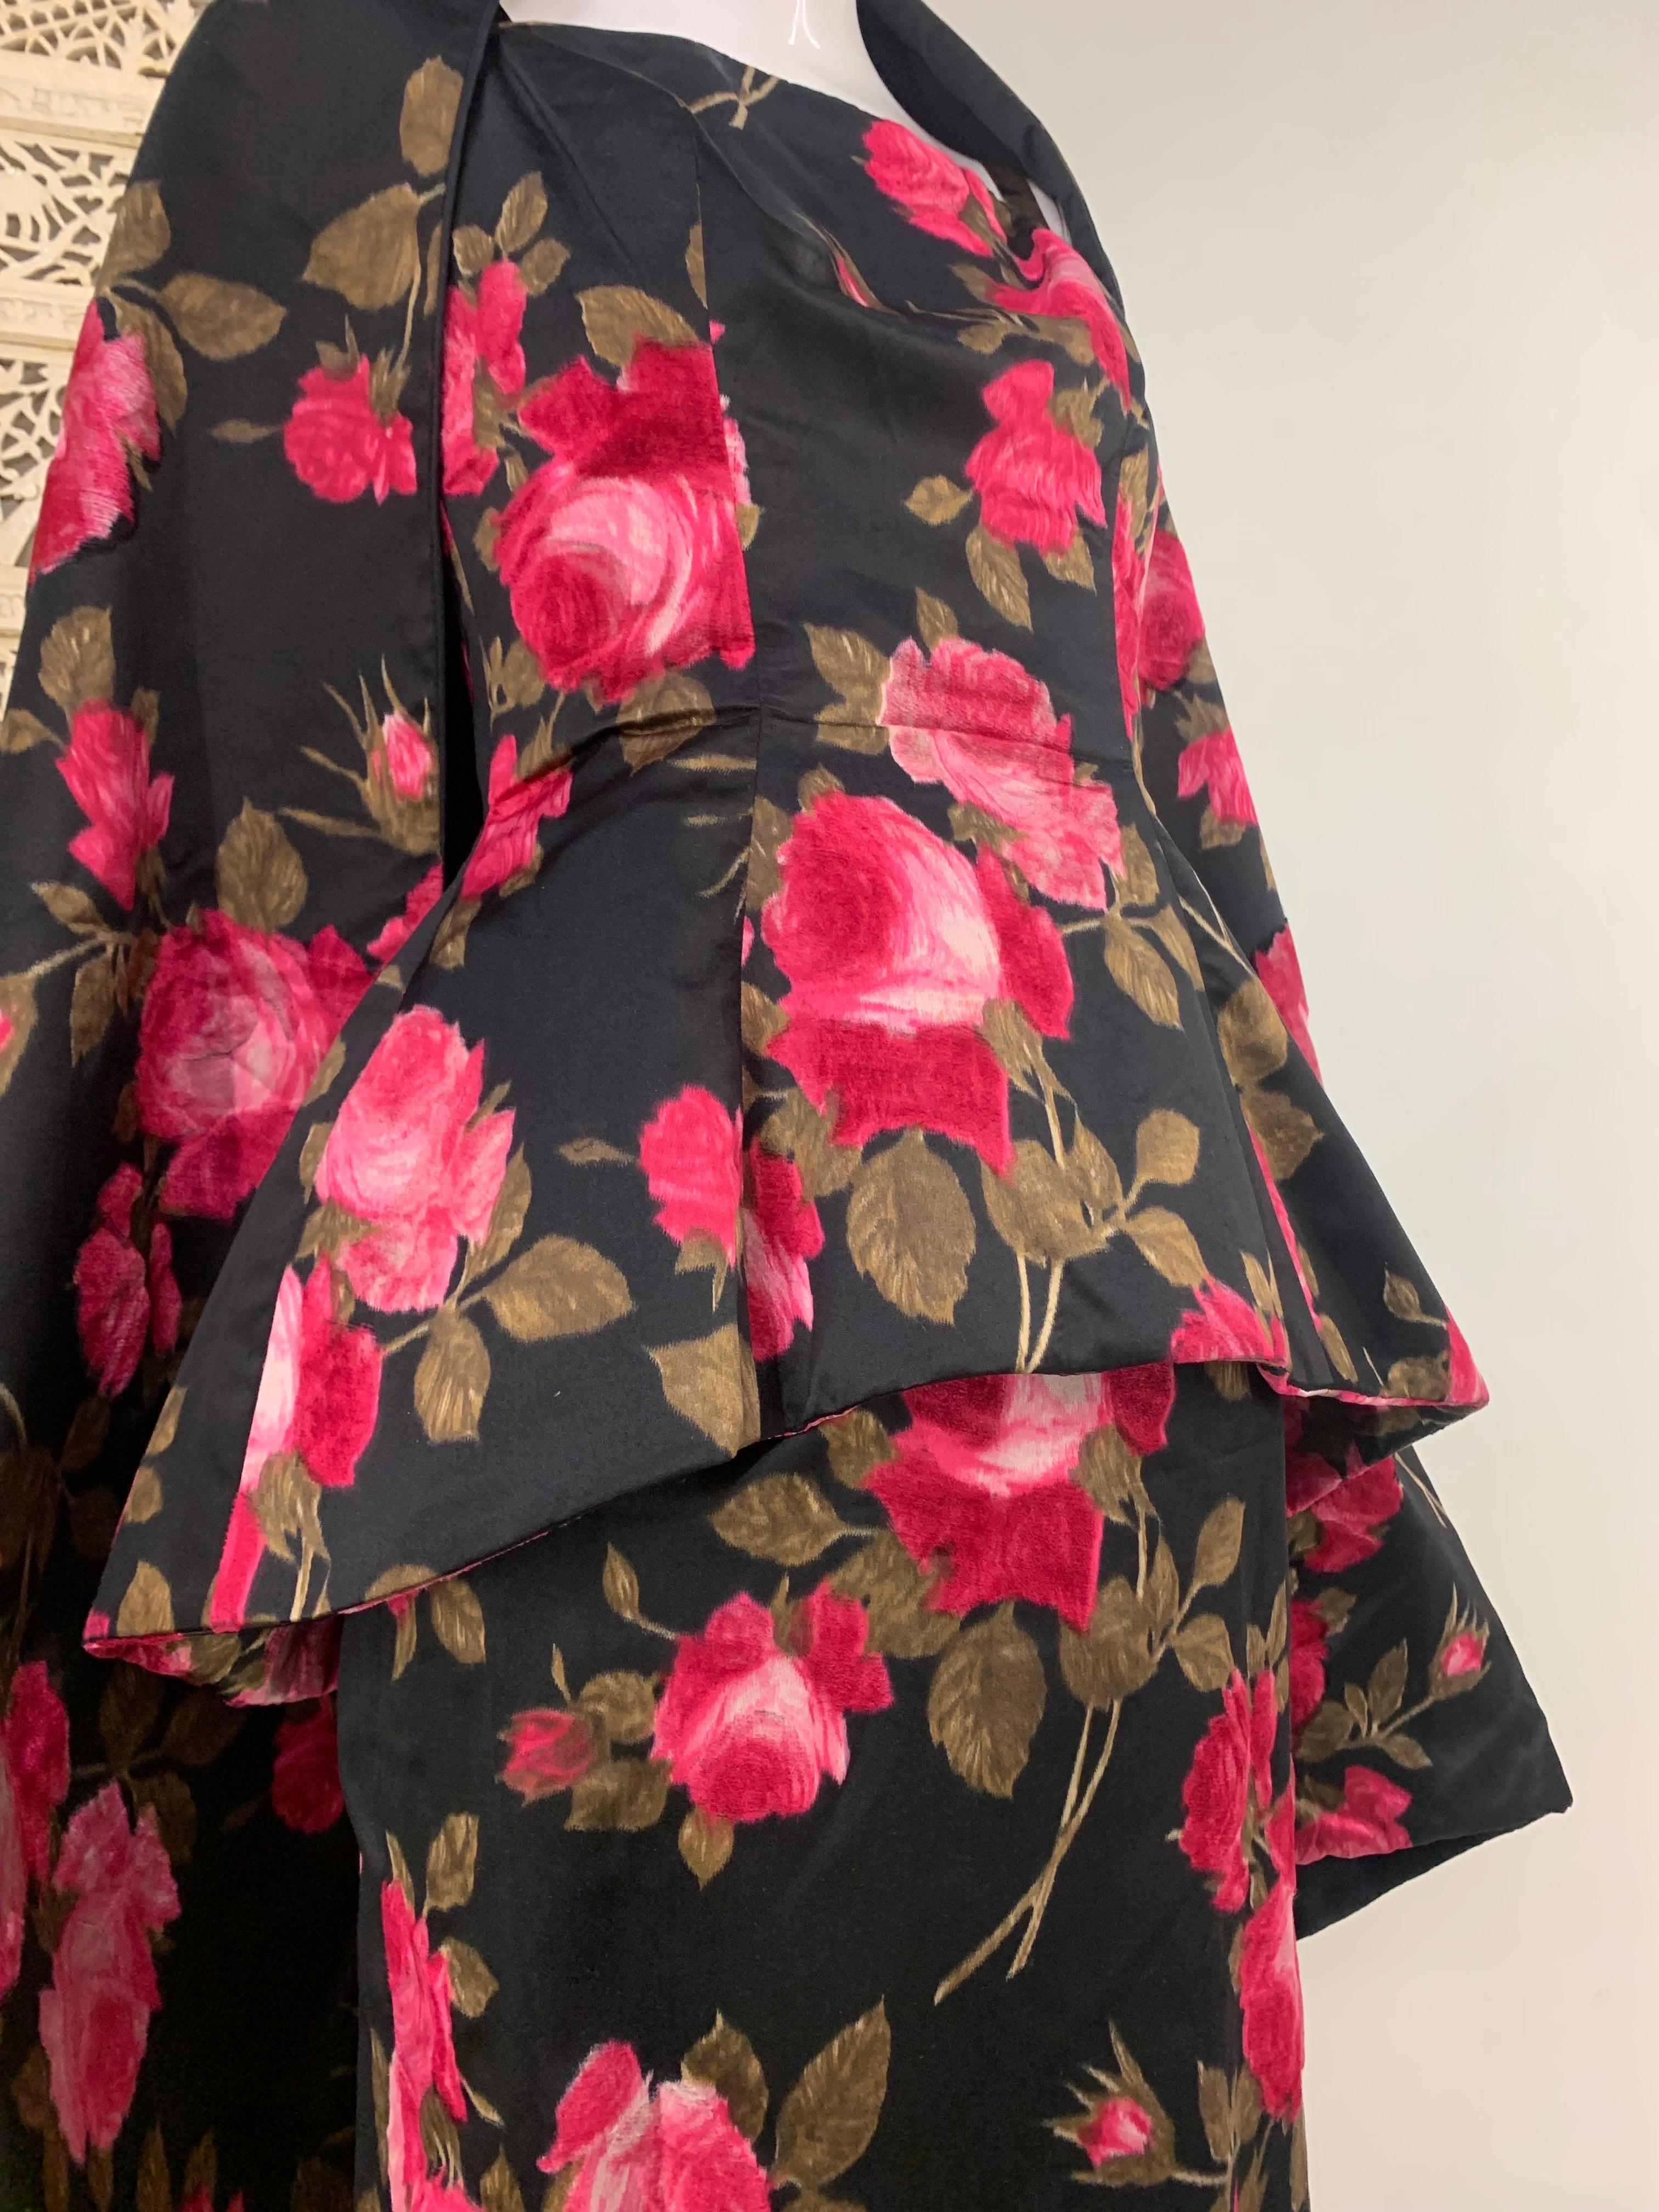 Elegant Mr. Blackwell 50s Floral Column w/ Structured Peplum and Matching Stole:  A fantastic example of Mr. Blackwell's 1950s style with a fitted column silhouette and beautiful structured peplum! Strapless with a very structured bodice. Also